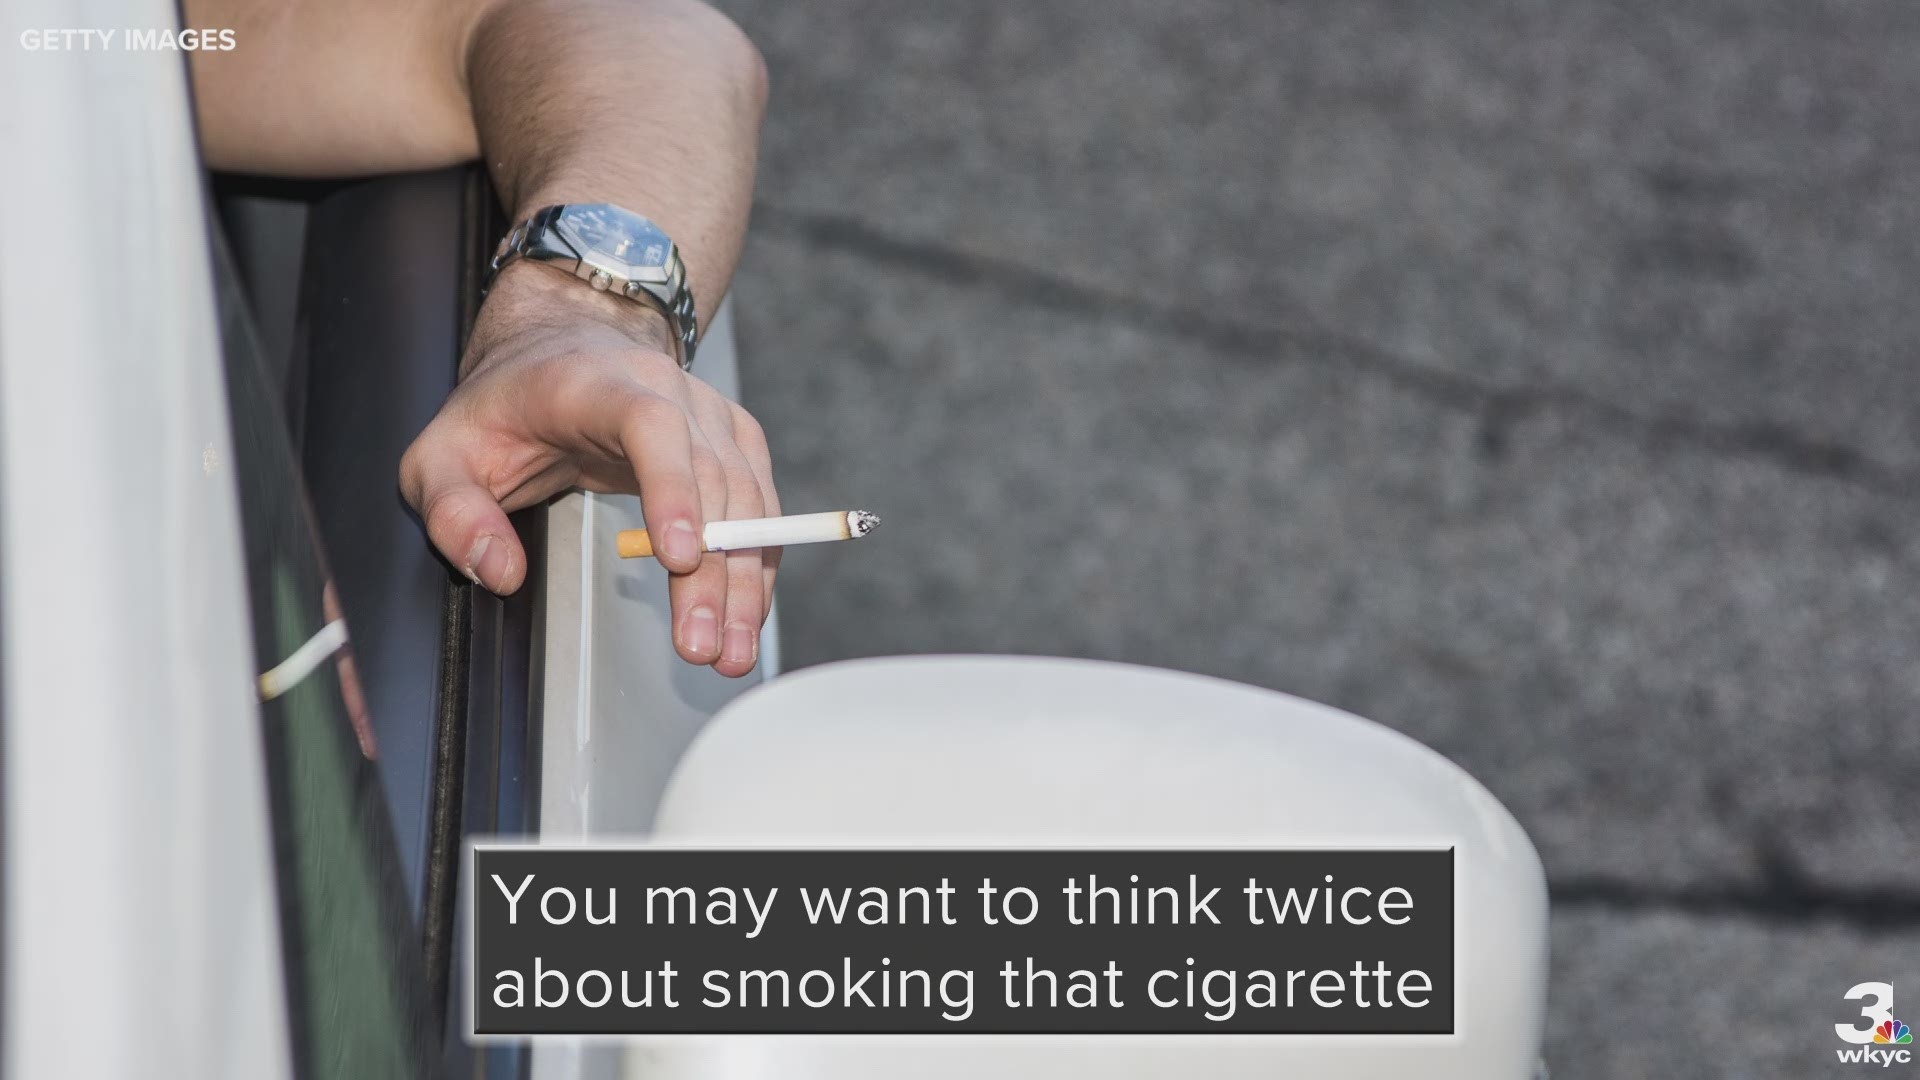 You may want to think twice about smoking that cigarette.